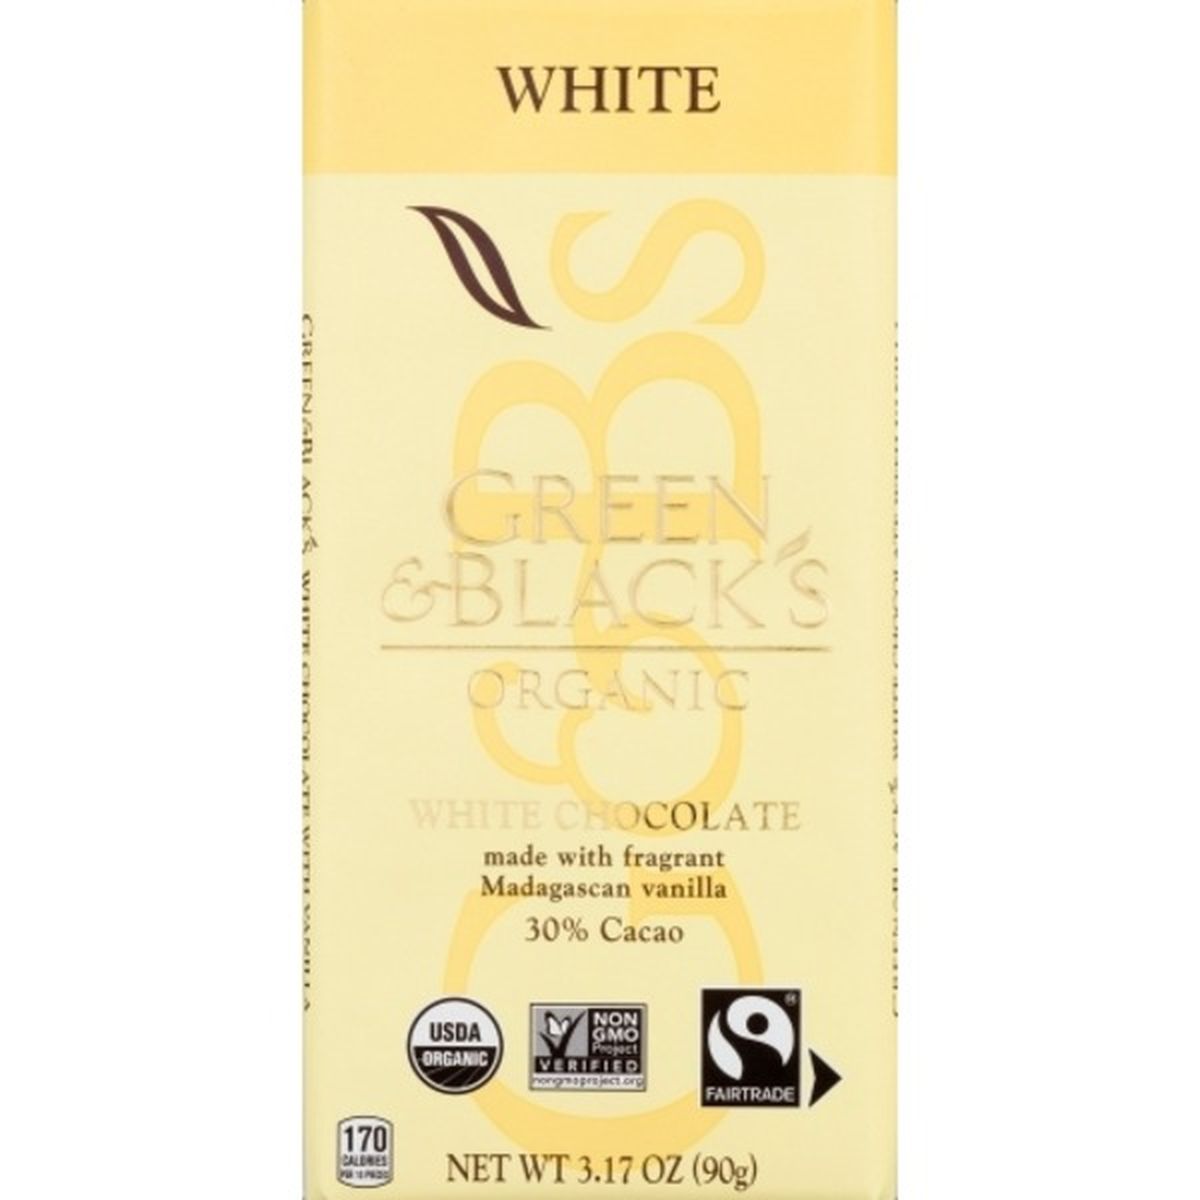 Calories in Green & Black's White Chocolate, Organic, 30% Cacao